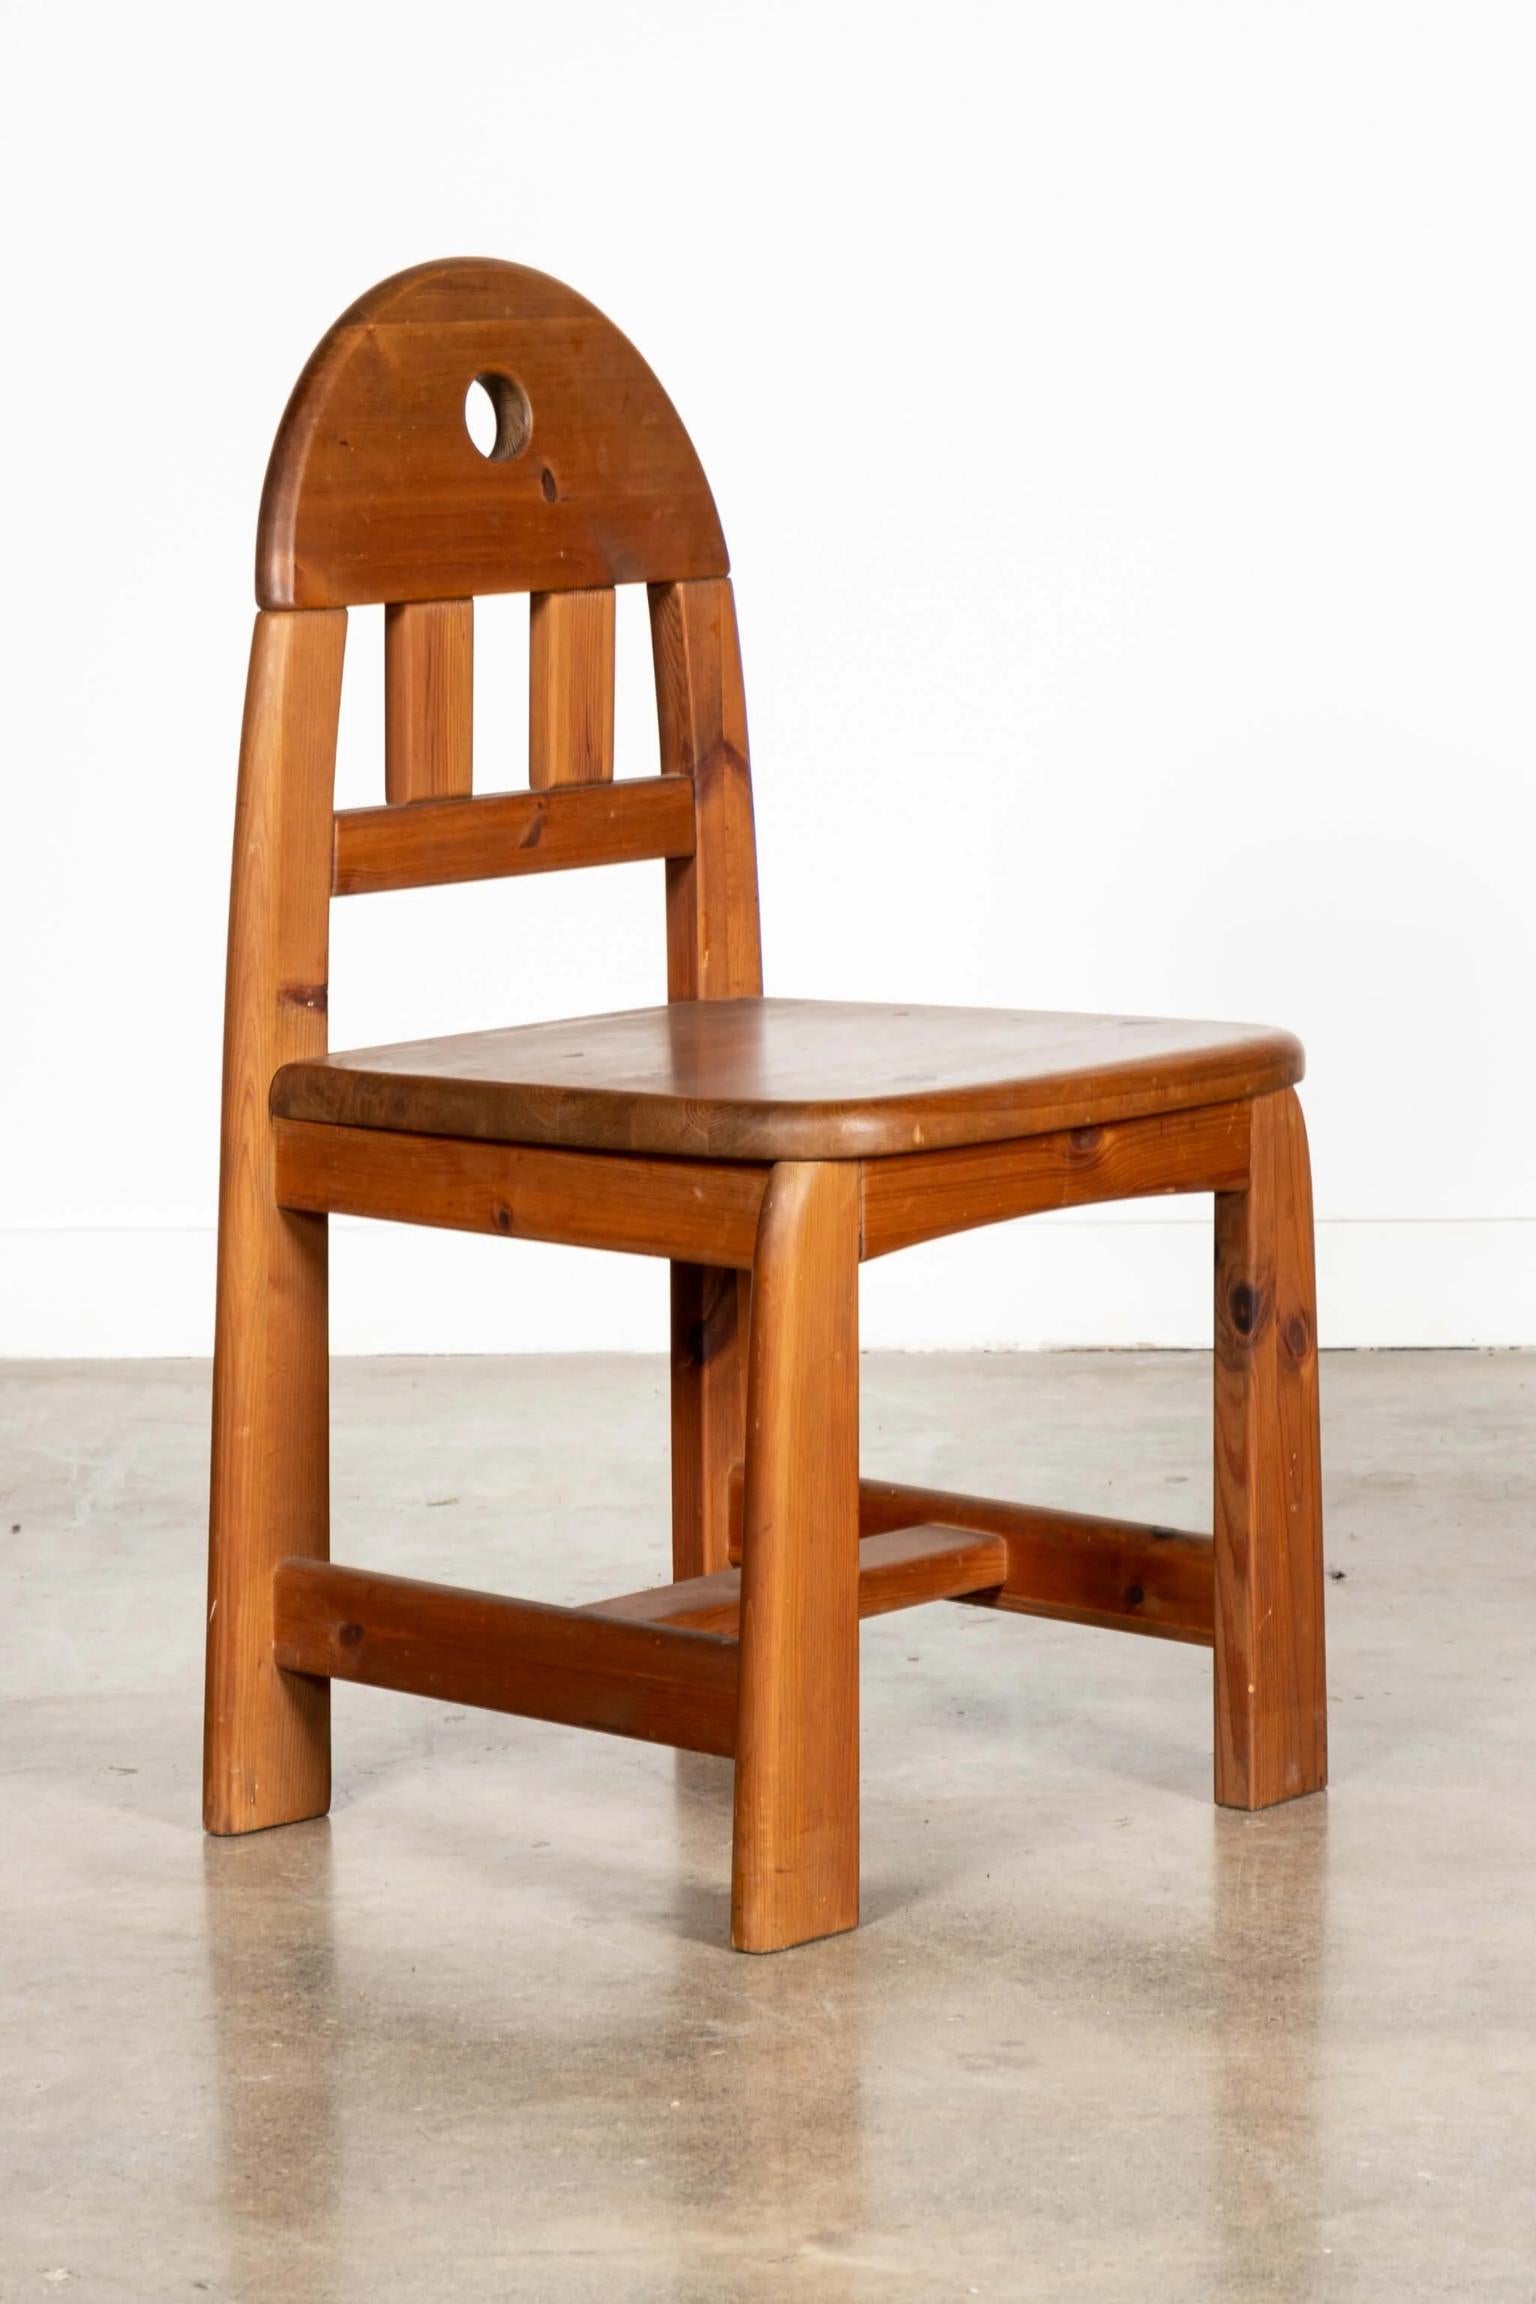 Brutalist Pine Wood Dining Chair by Wasa Mobel In Good Condition For Sale In Toronto, CA